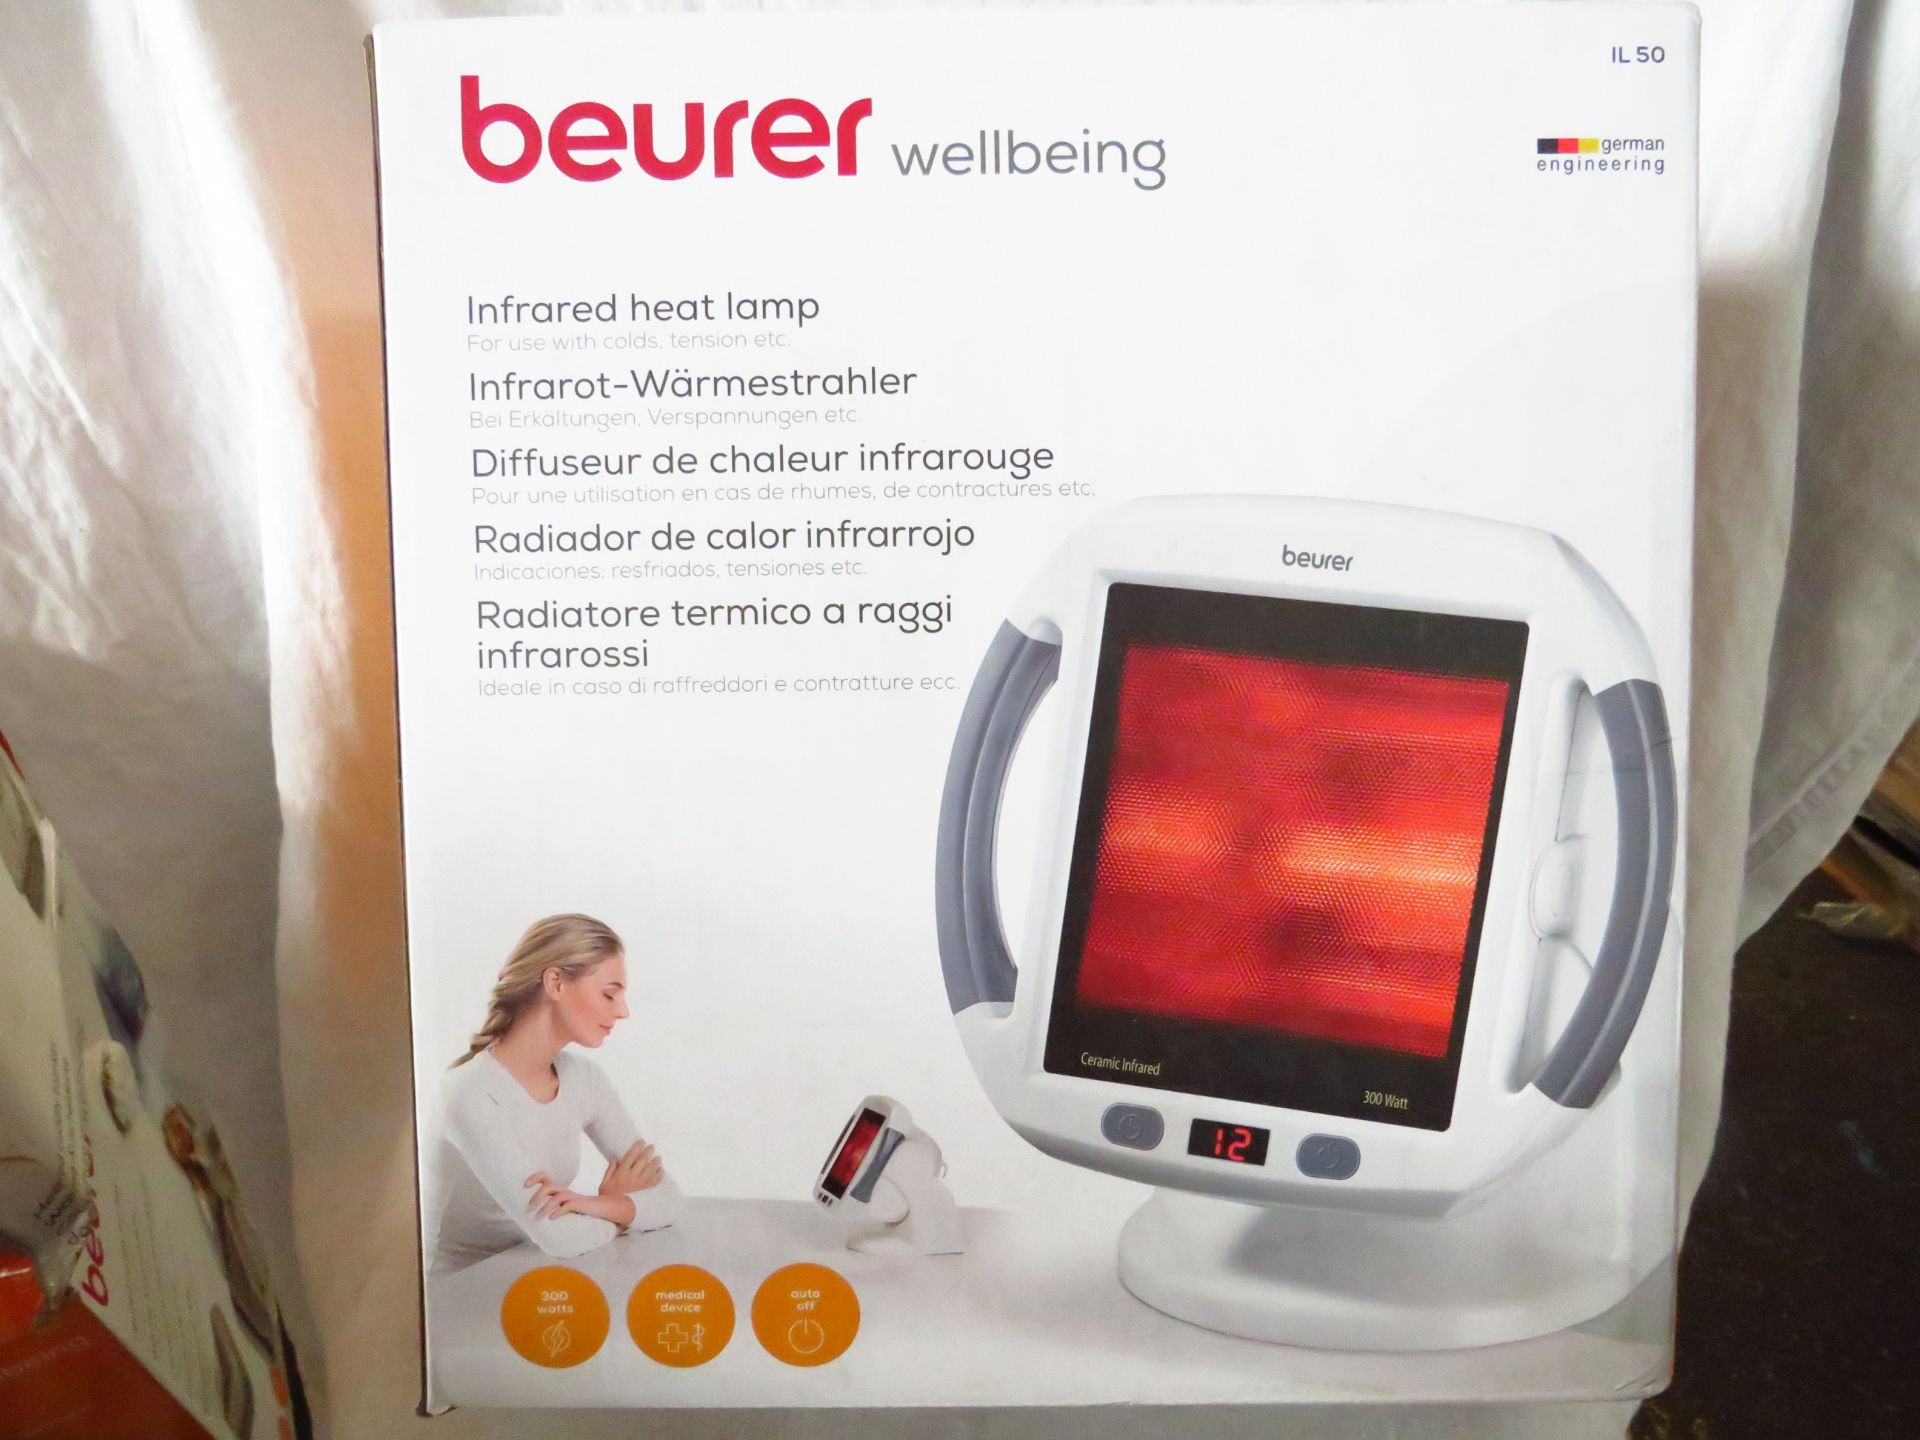 Beurer IL50 infrared lamp grade B but unchecked by us, boxed